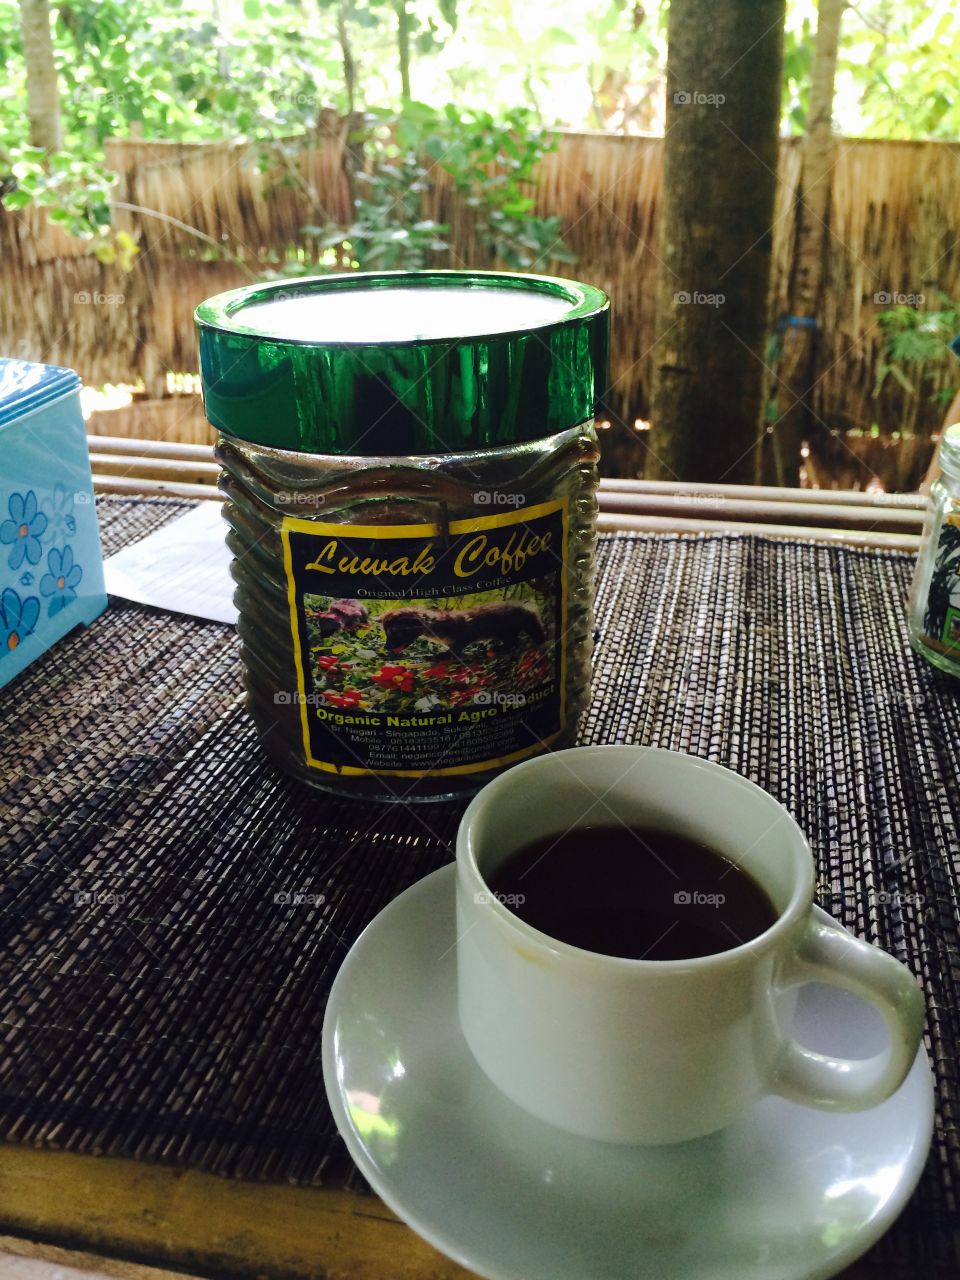 Luwak coffee. Most expensive coffee in the world